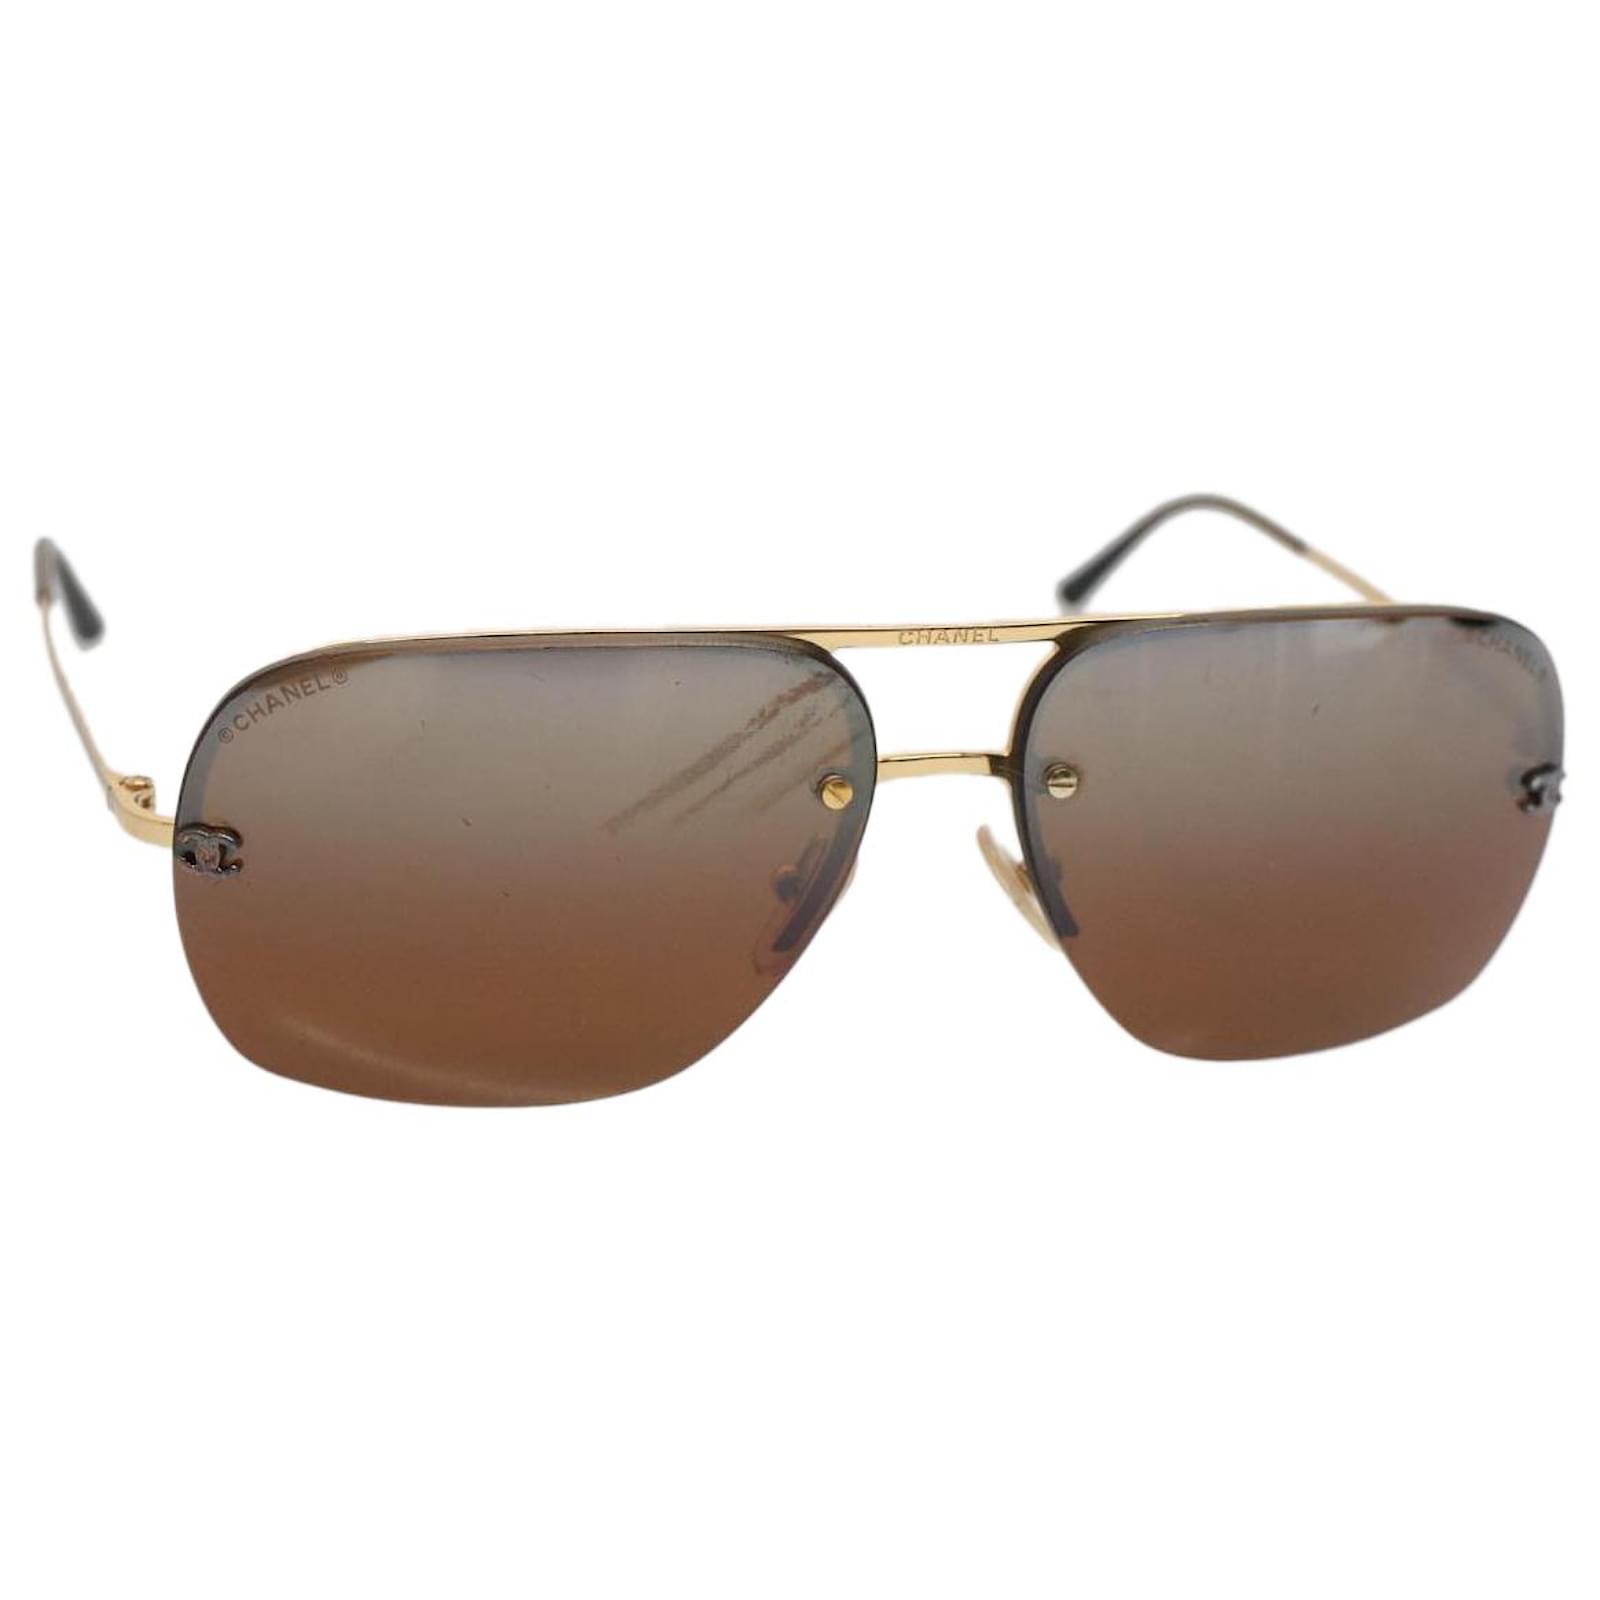 Sunglasses CHANEL CH5508 174311 56-18 Brown Gradient Olive in